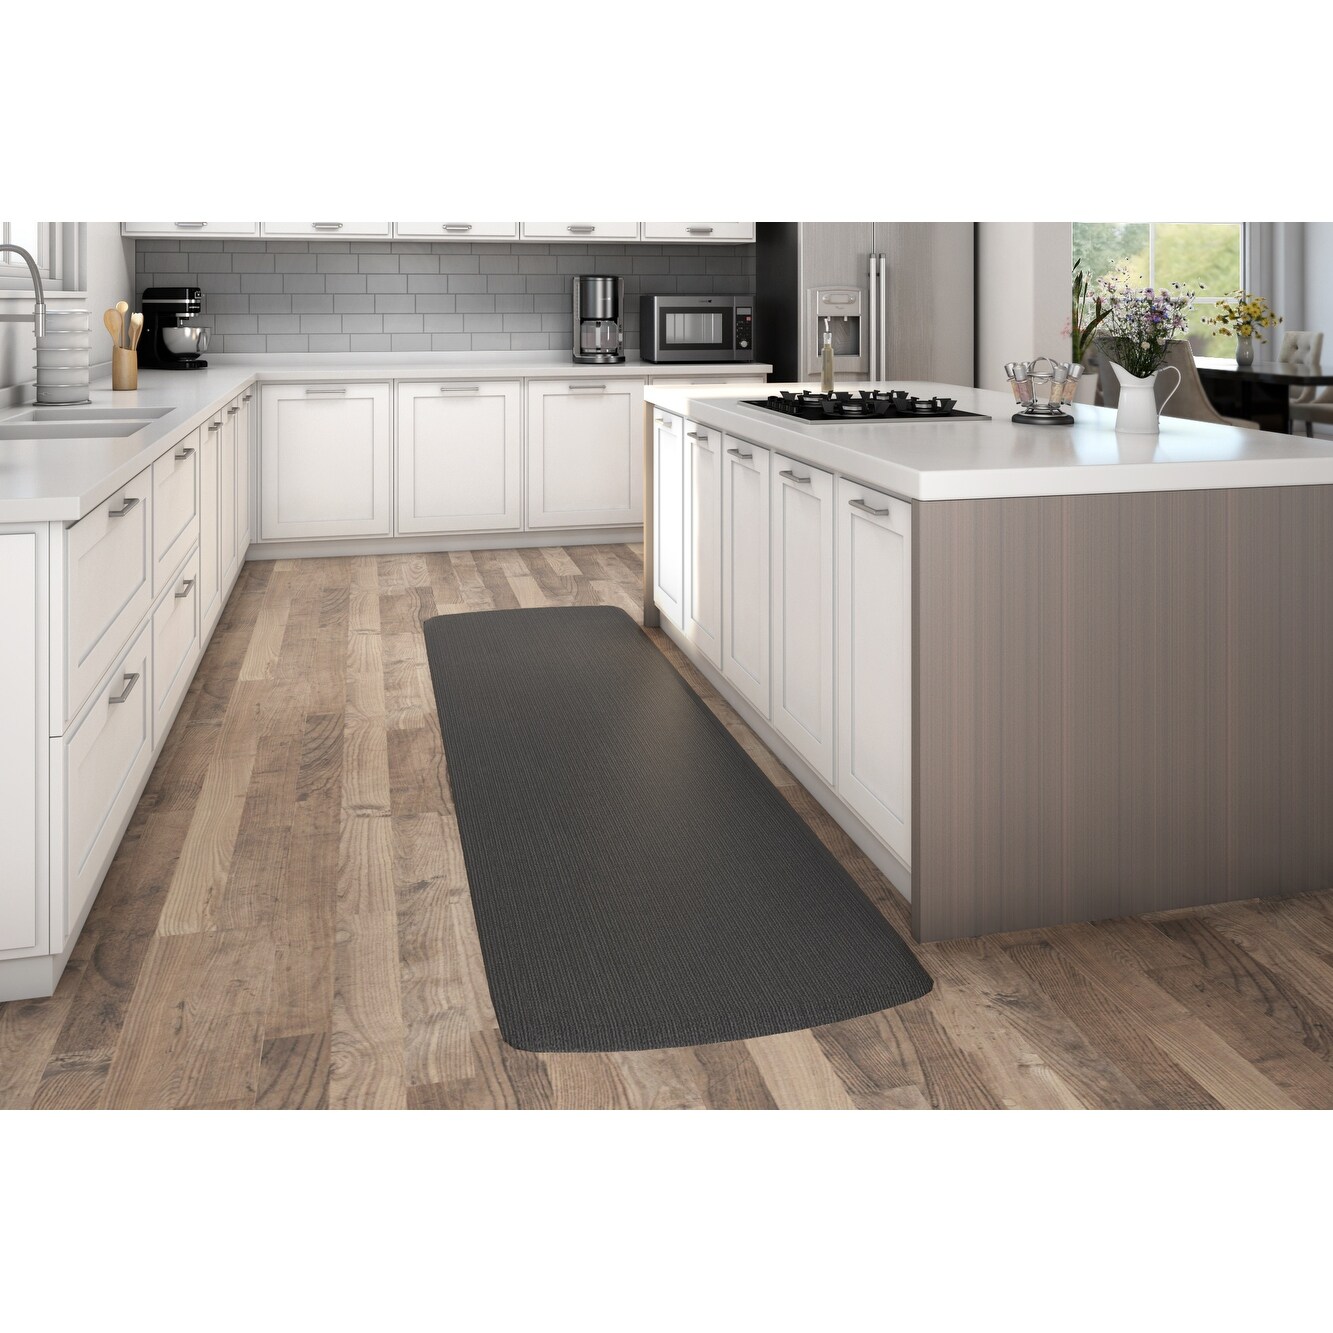 https://ak1.ostkcdn.com/images/products/is/images/direct/bcdfc8483ba1142bc420f475663f54bf5ed1f7a3/Designer-Comfort-Grasscloth-Anti-fatigue-Kitchen-Mat.jpg